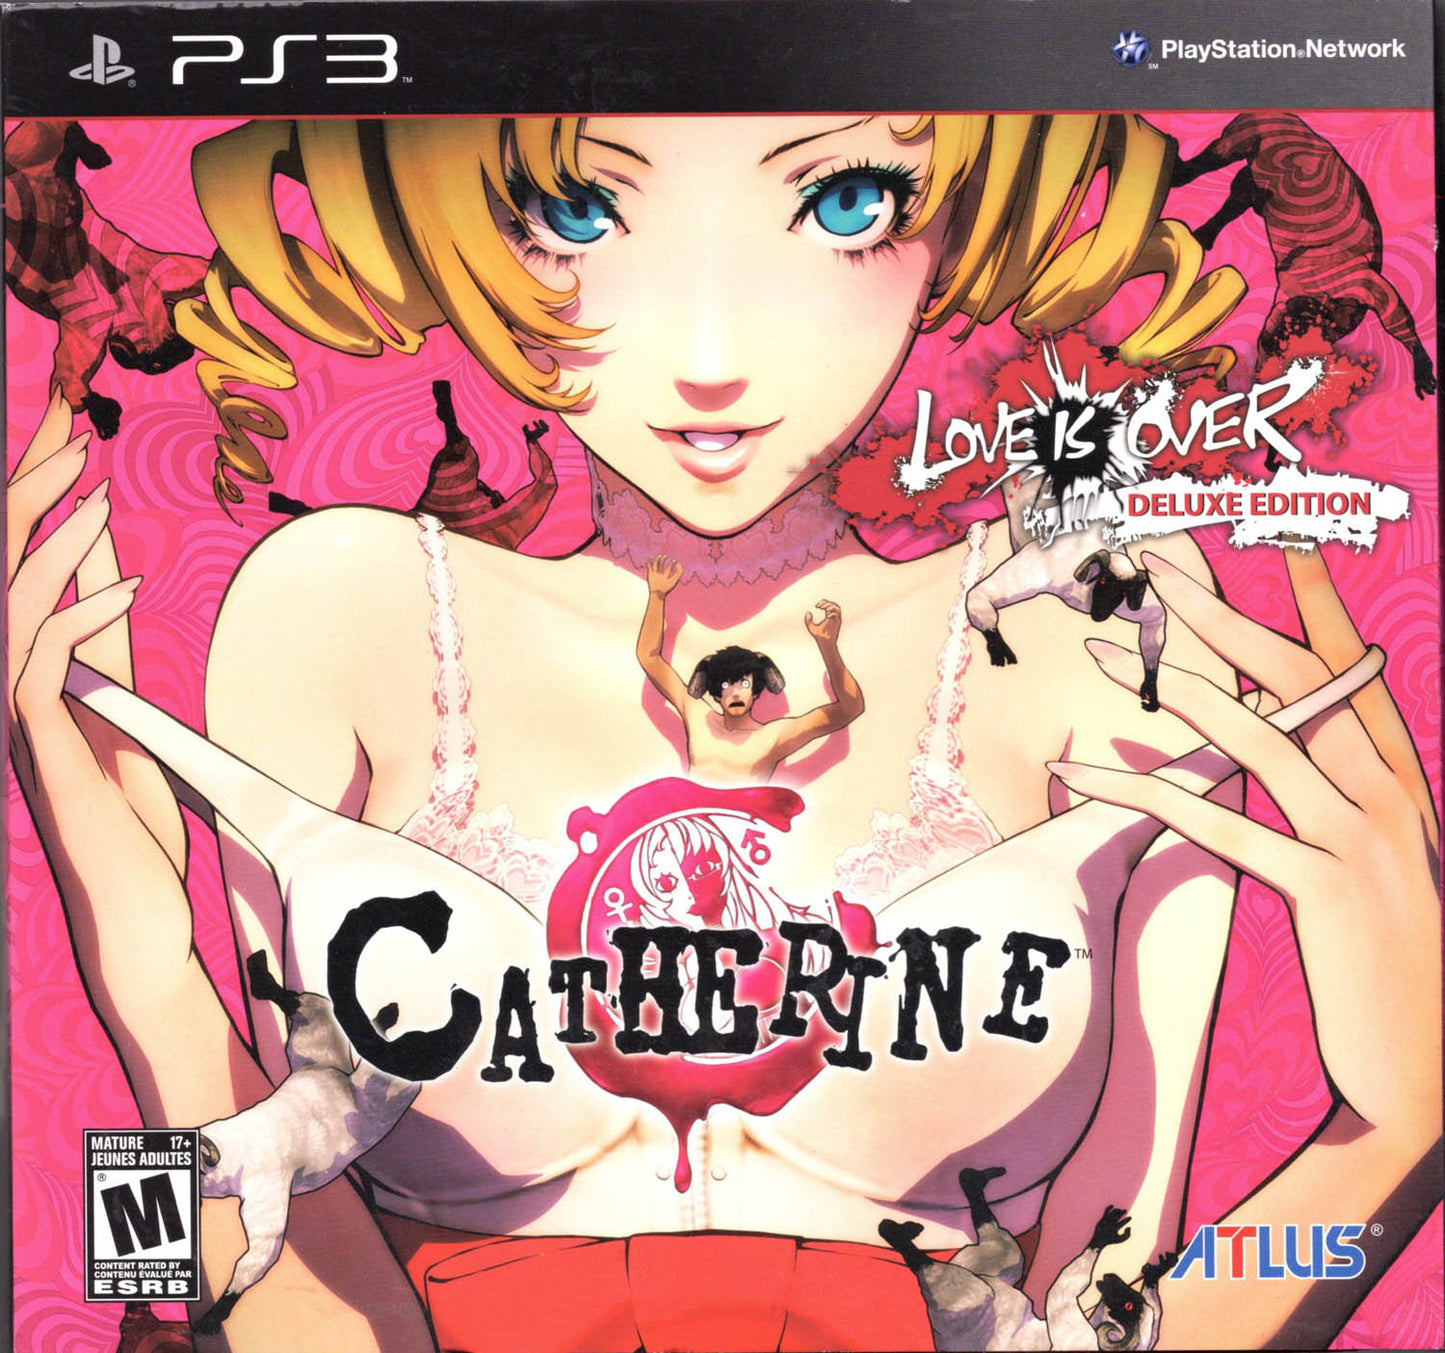 Catherine: Love Is Over Deluxe Edition (Playstation 3)